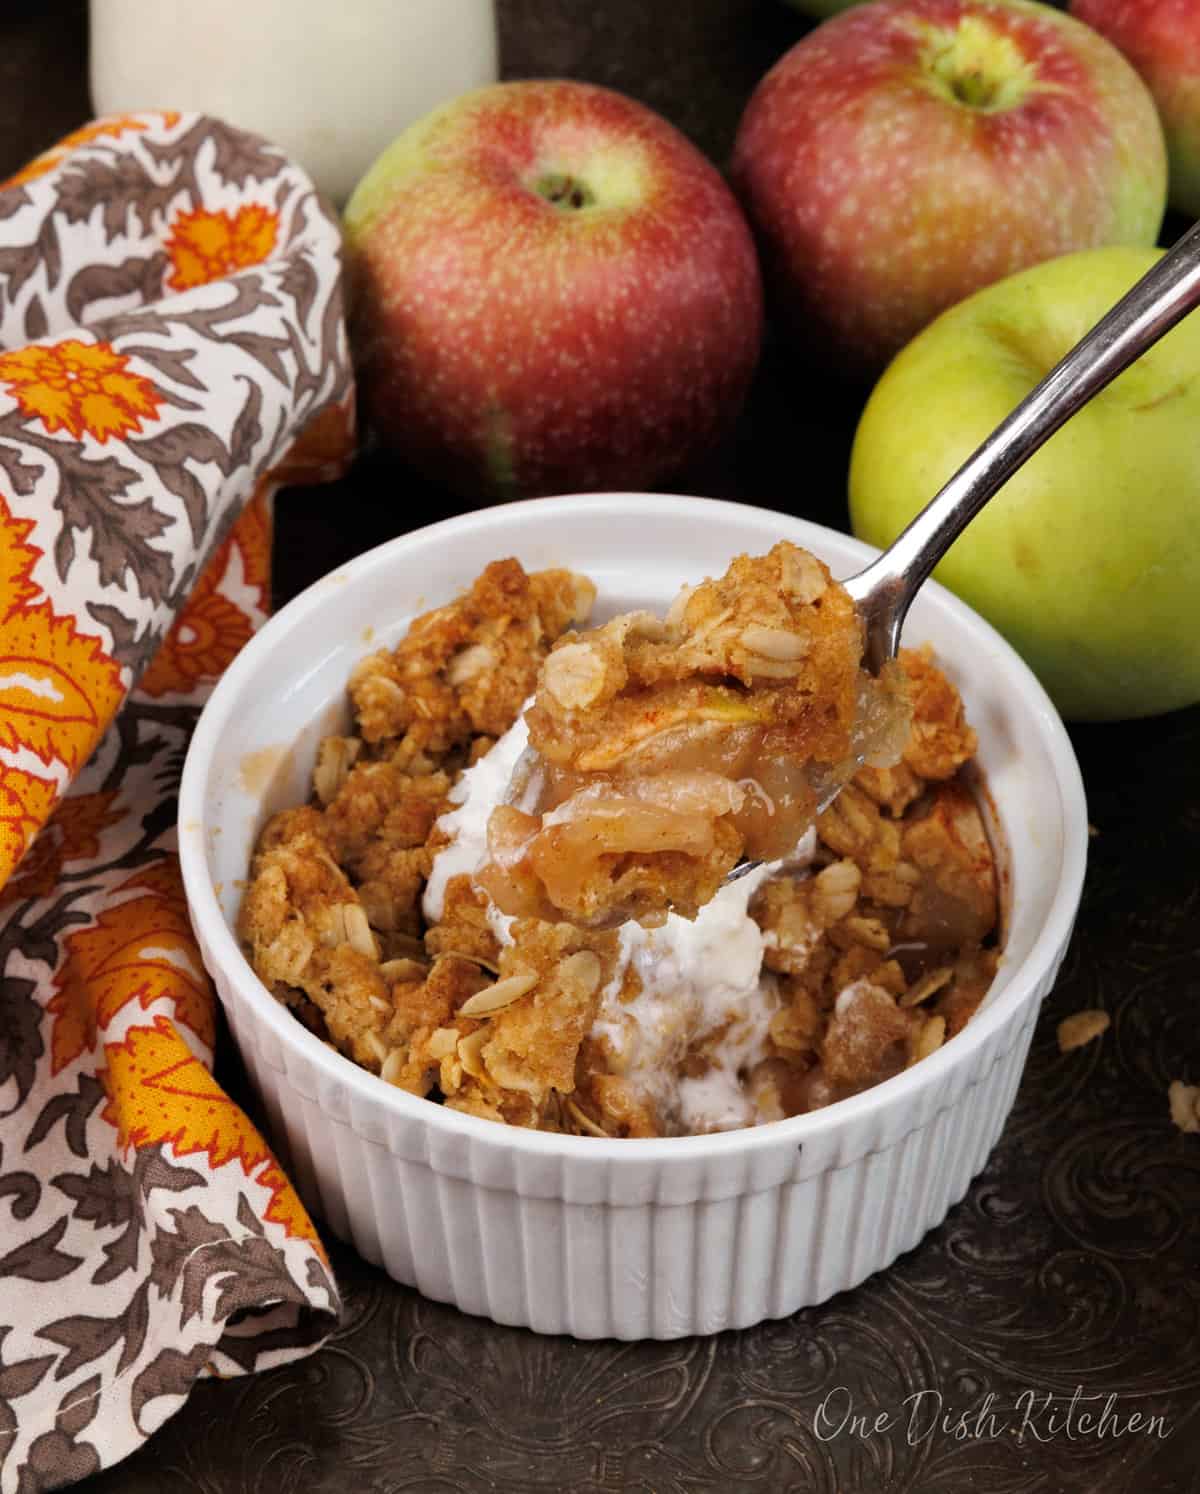 a spoon in an individual apple crisp with apples hanging off of the spoon